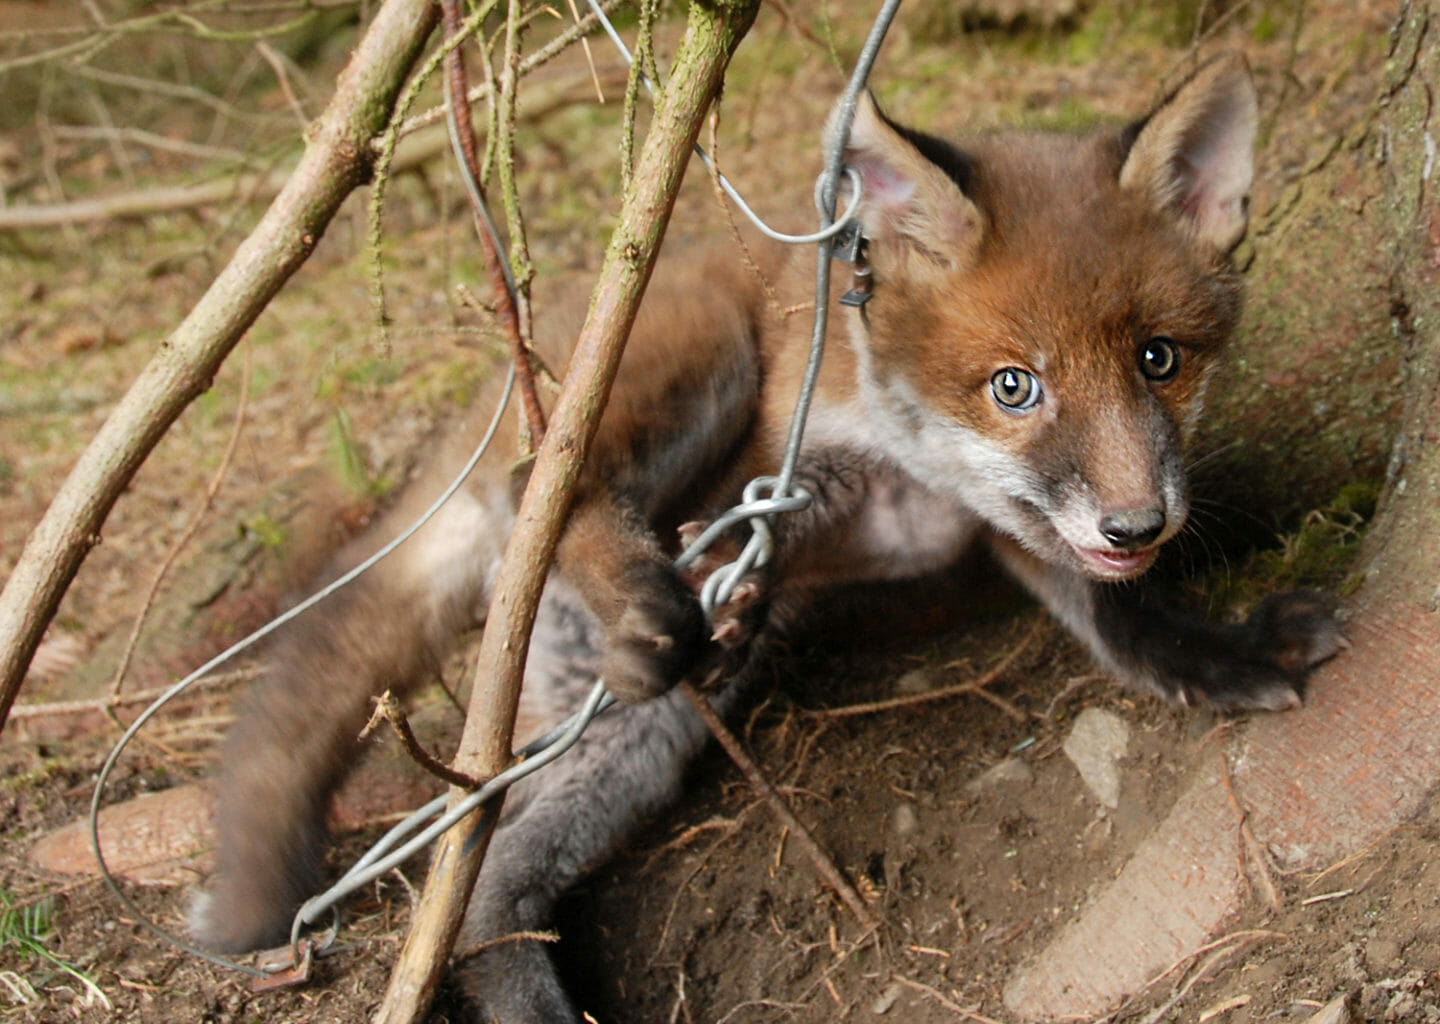 Snare traps killing and injuring pets and protected species, claims report 1